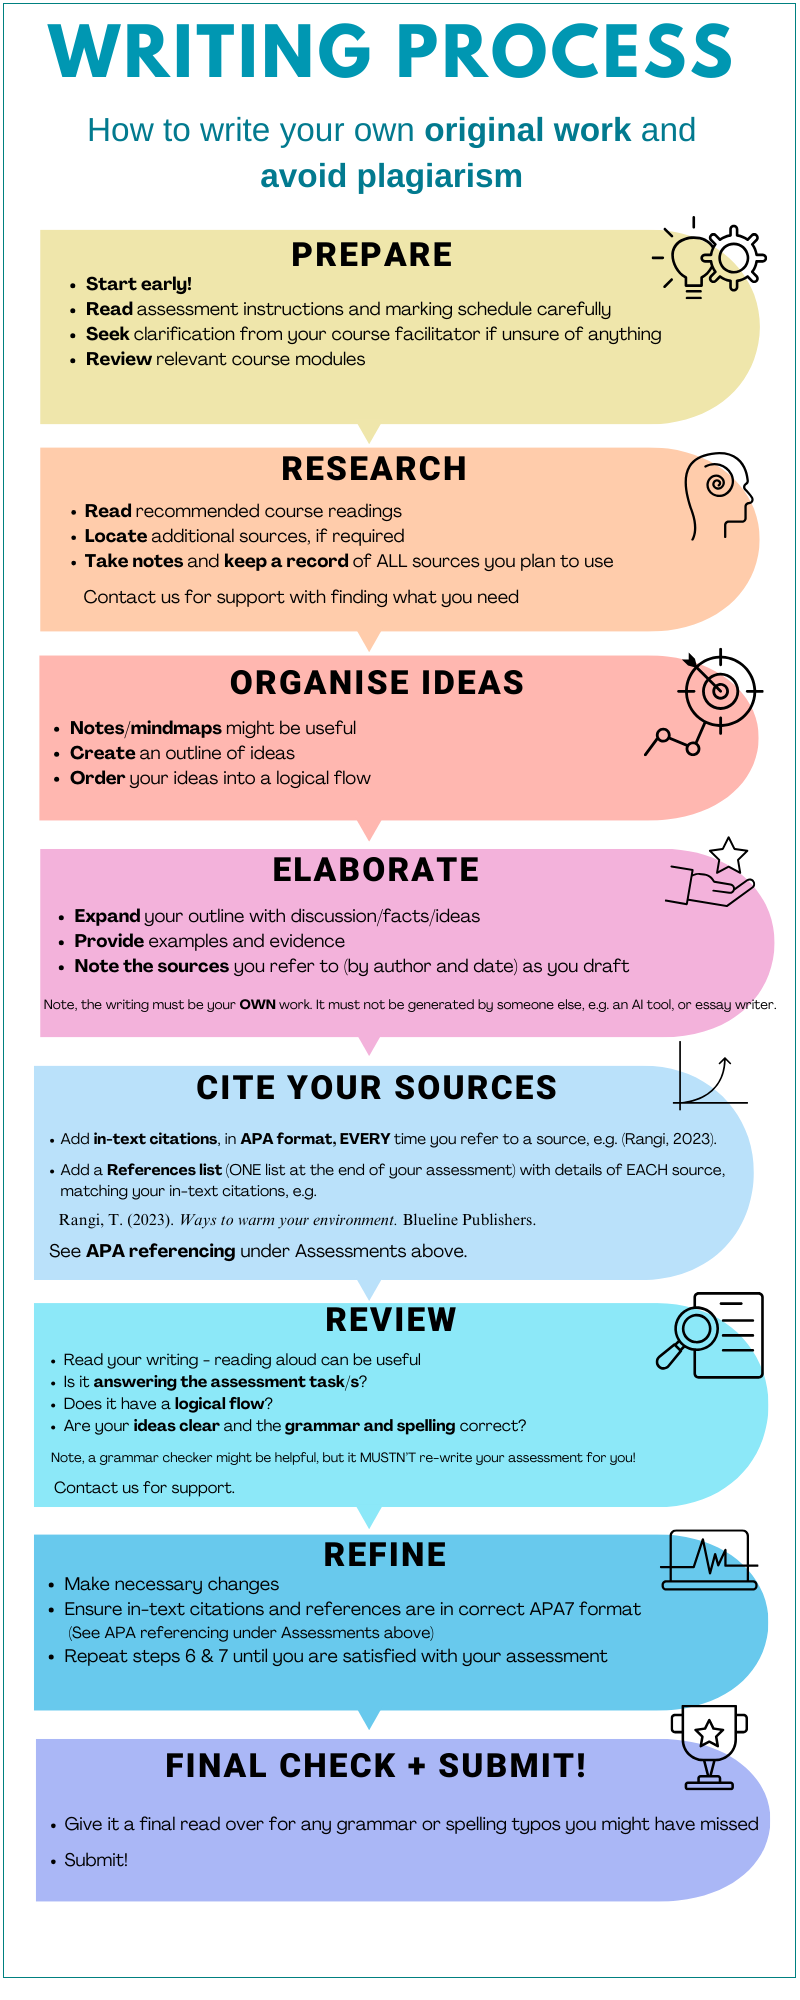 Writing process step by step guide + avoiding plagiarism: prepare, research, organise ideas, elaborate, cite your sources, review, refine & submit.